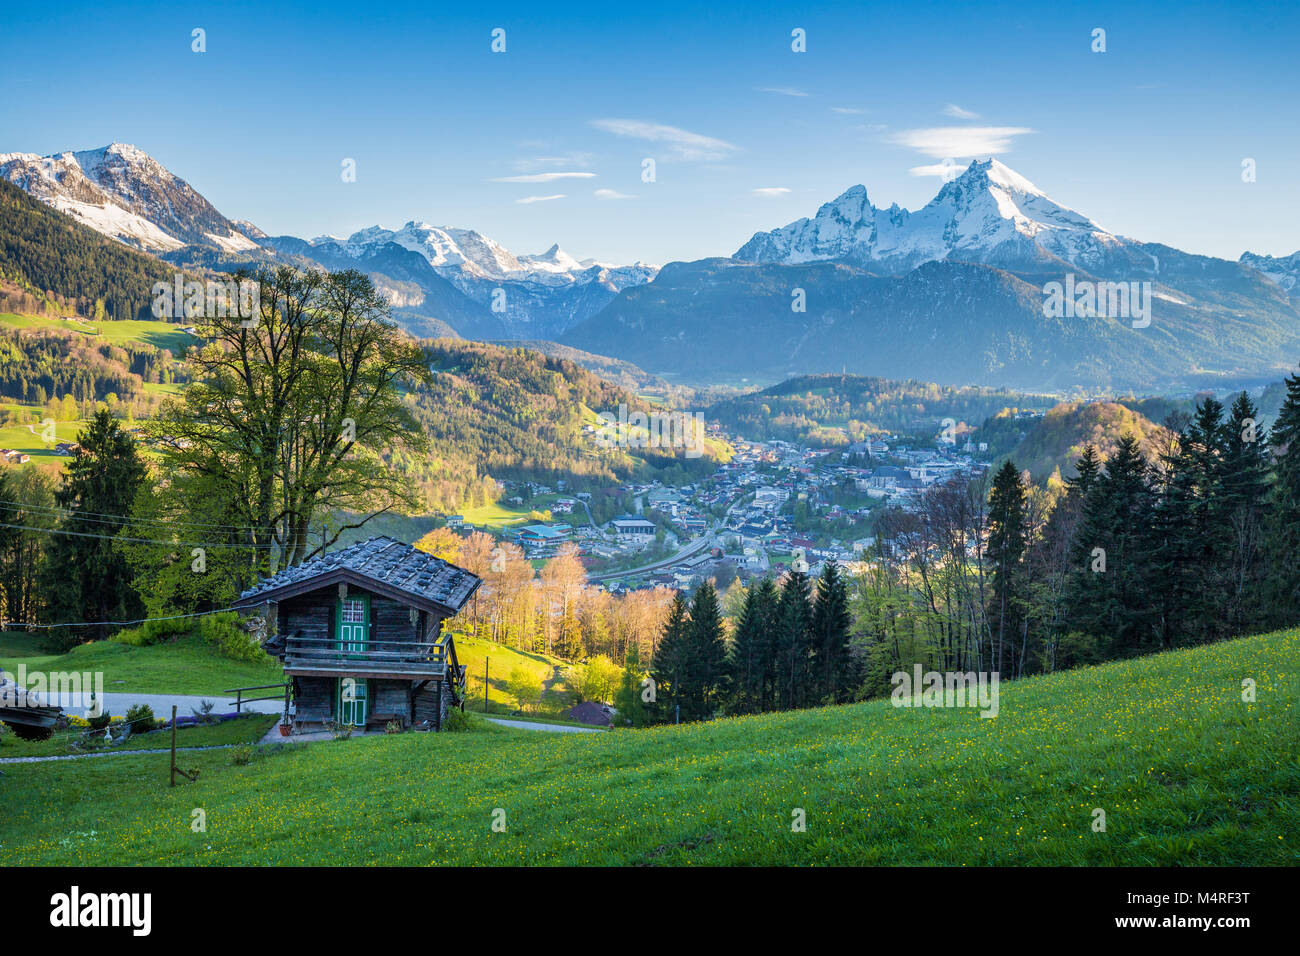 Beautiful view of idyllic alpine mountain scenery with traditional mountain cabin and snowcapped mountain peaks in scenic last evening light in summer Stock Photo